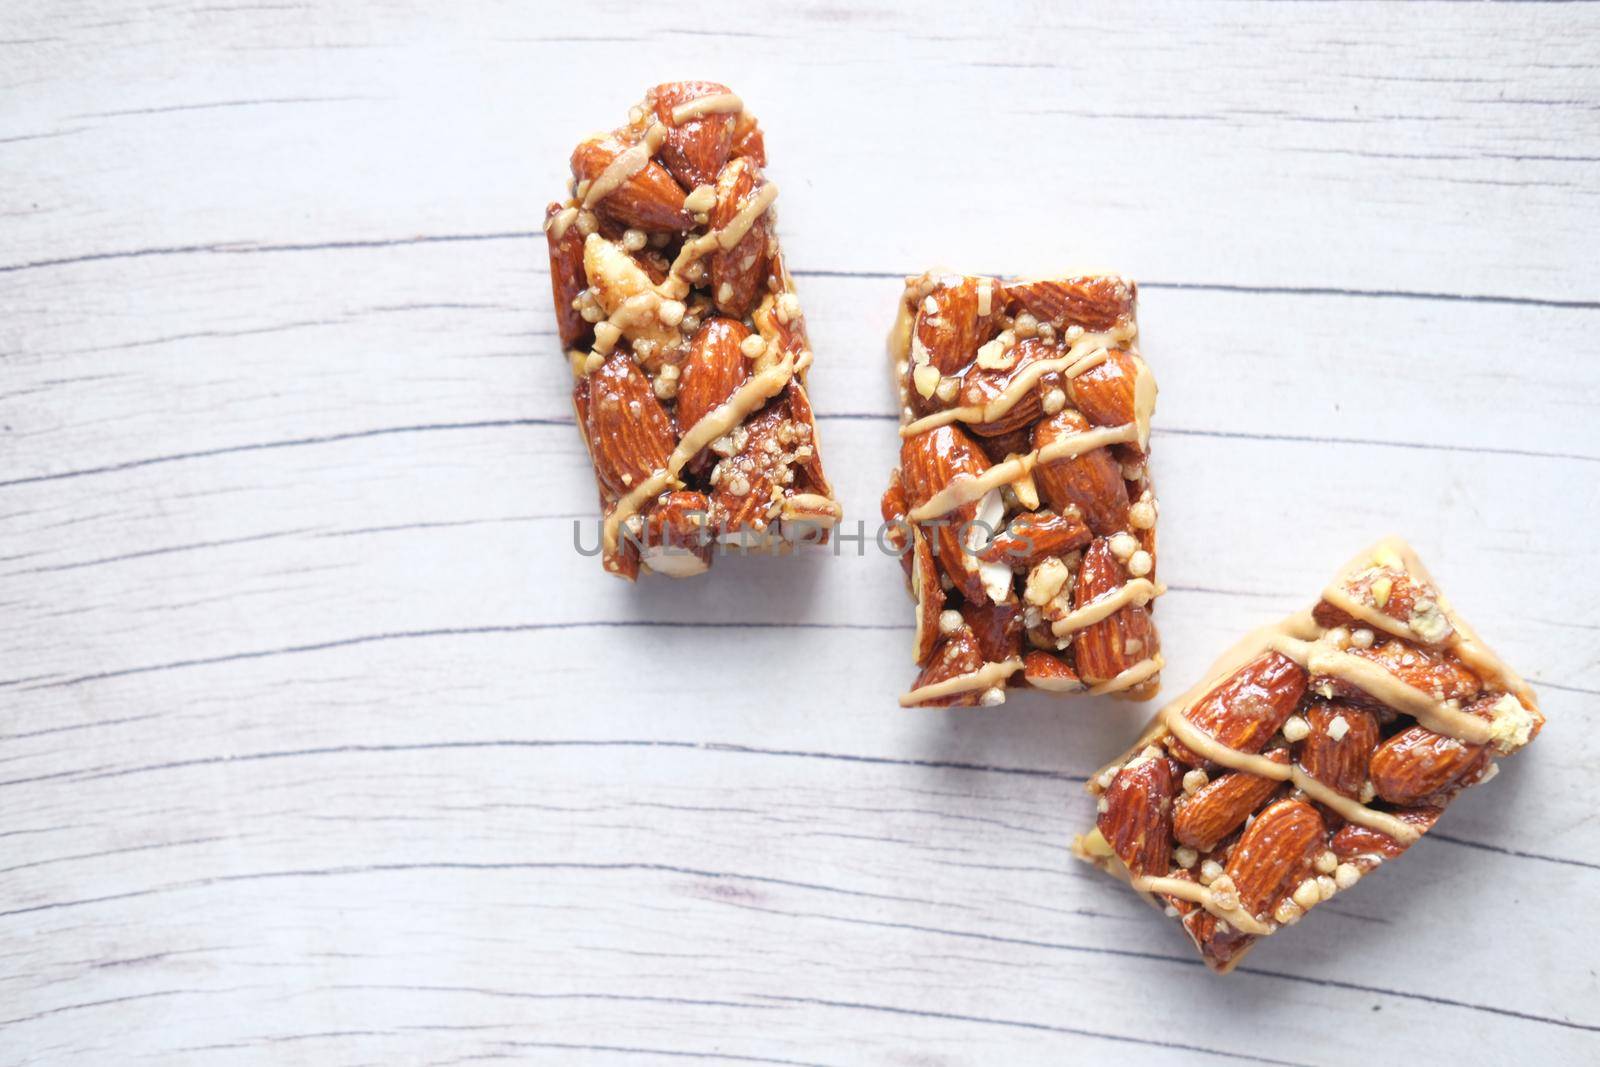 Almond and oat protein bars on table